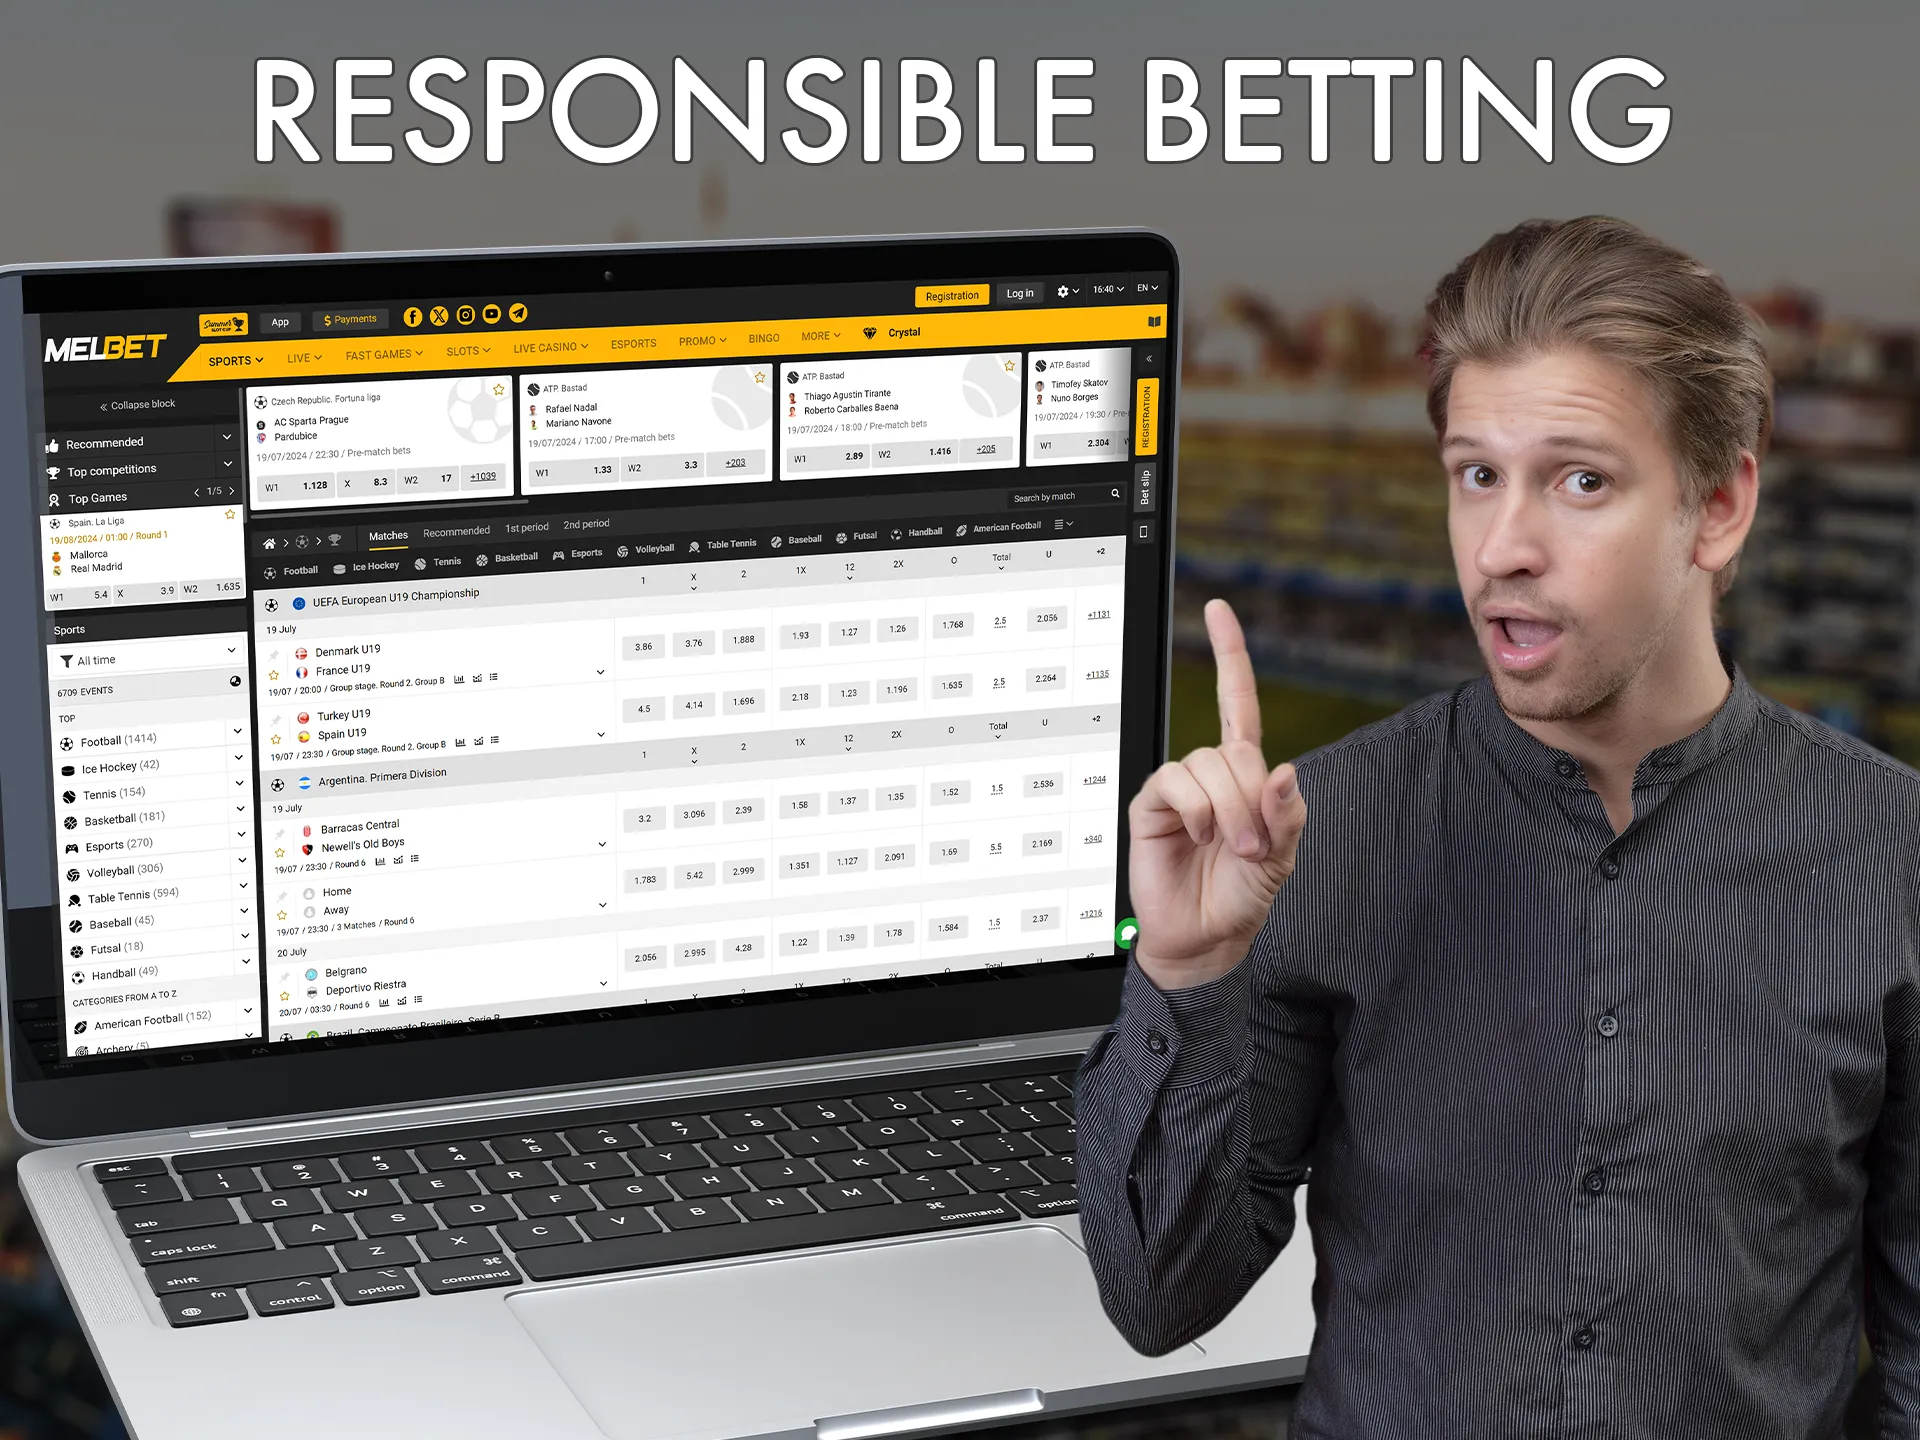 Be responsible when you place your bets.